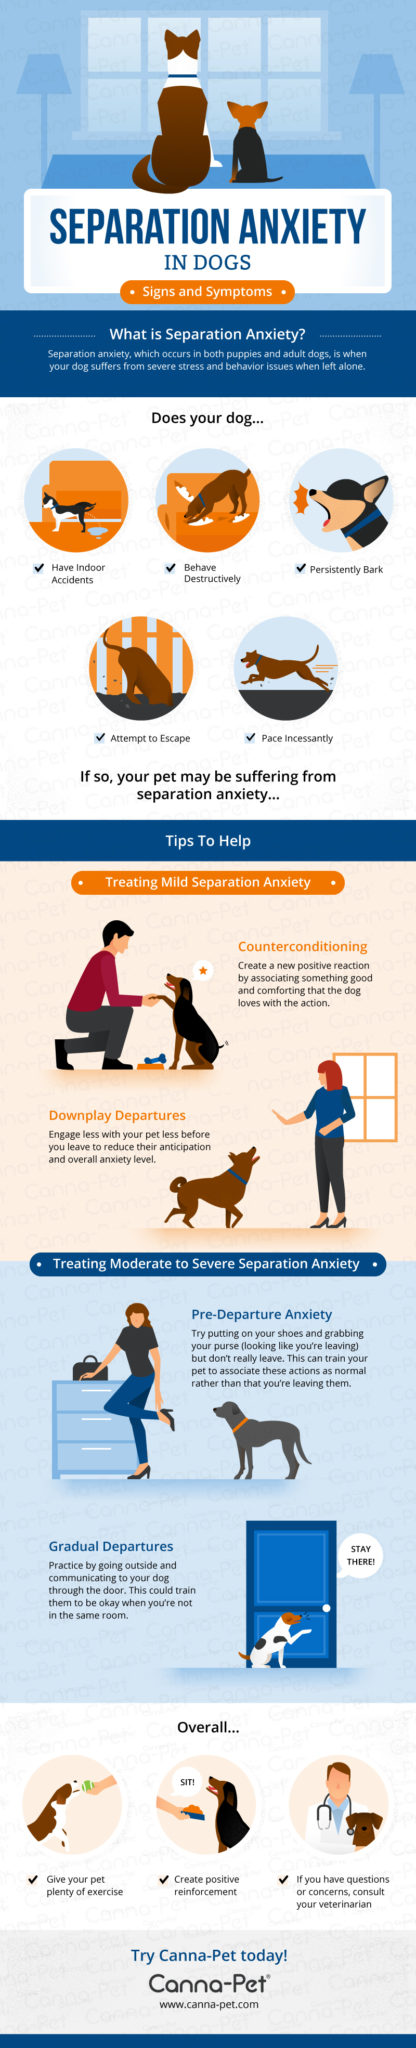 separation anxiety in dogs_canna-pet